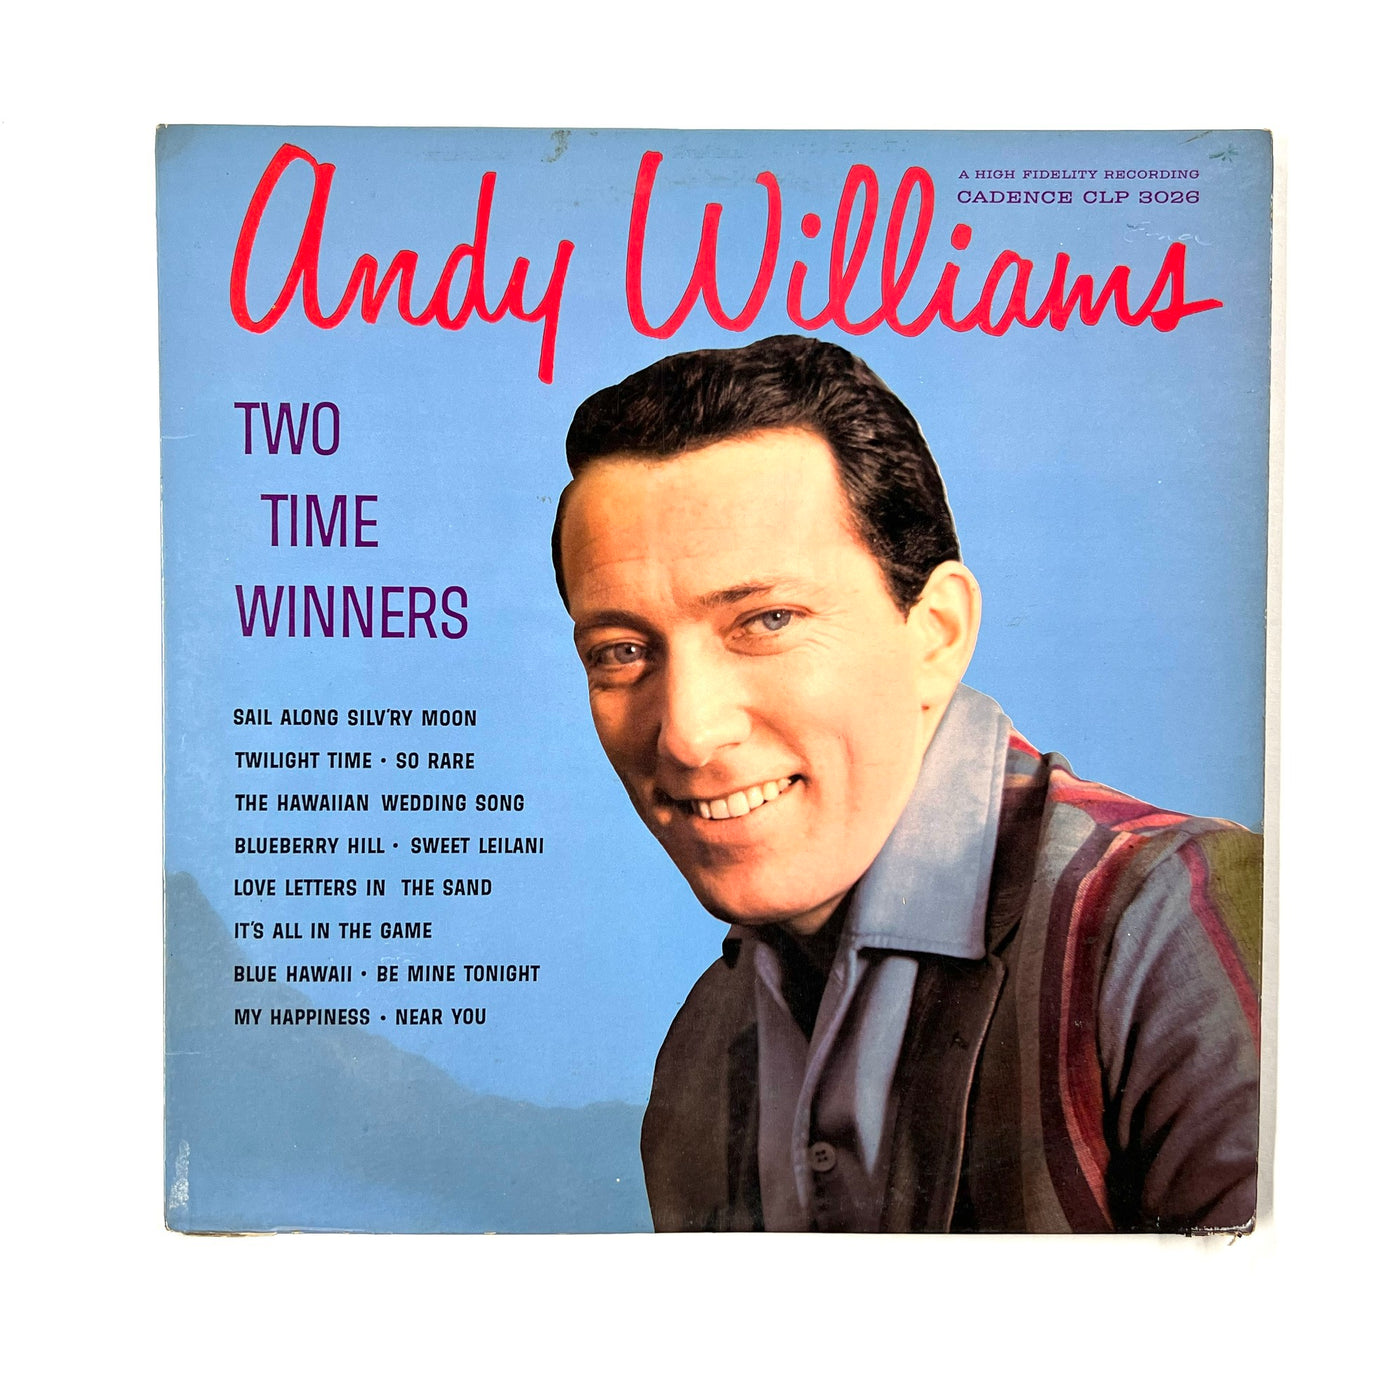 Andy Williams - Two Time Winners